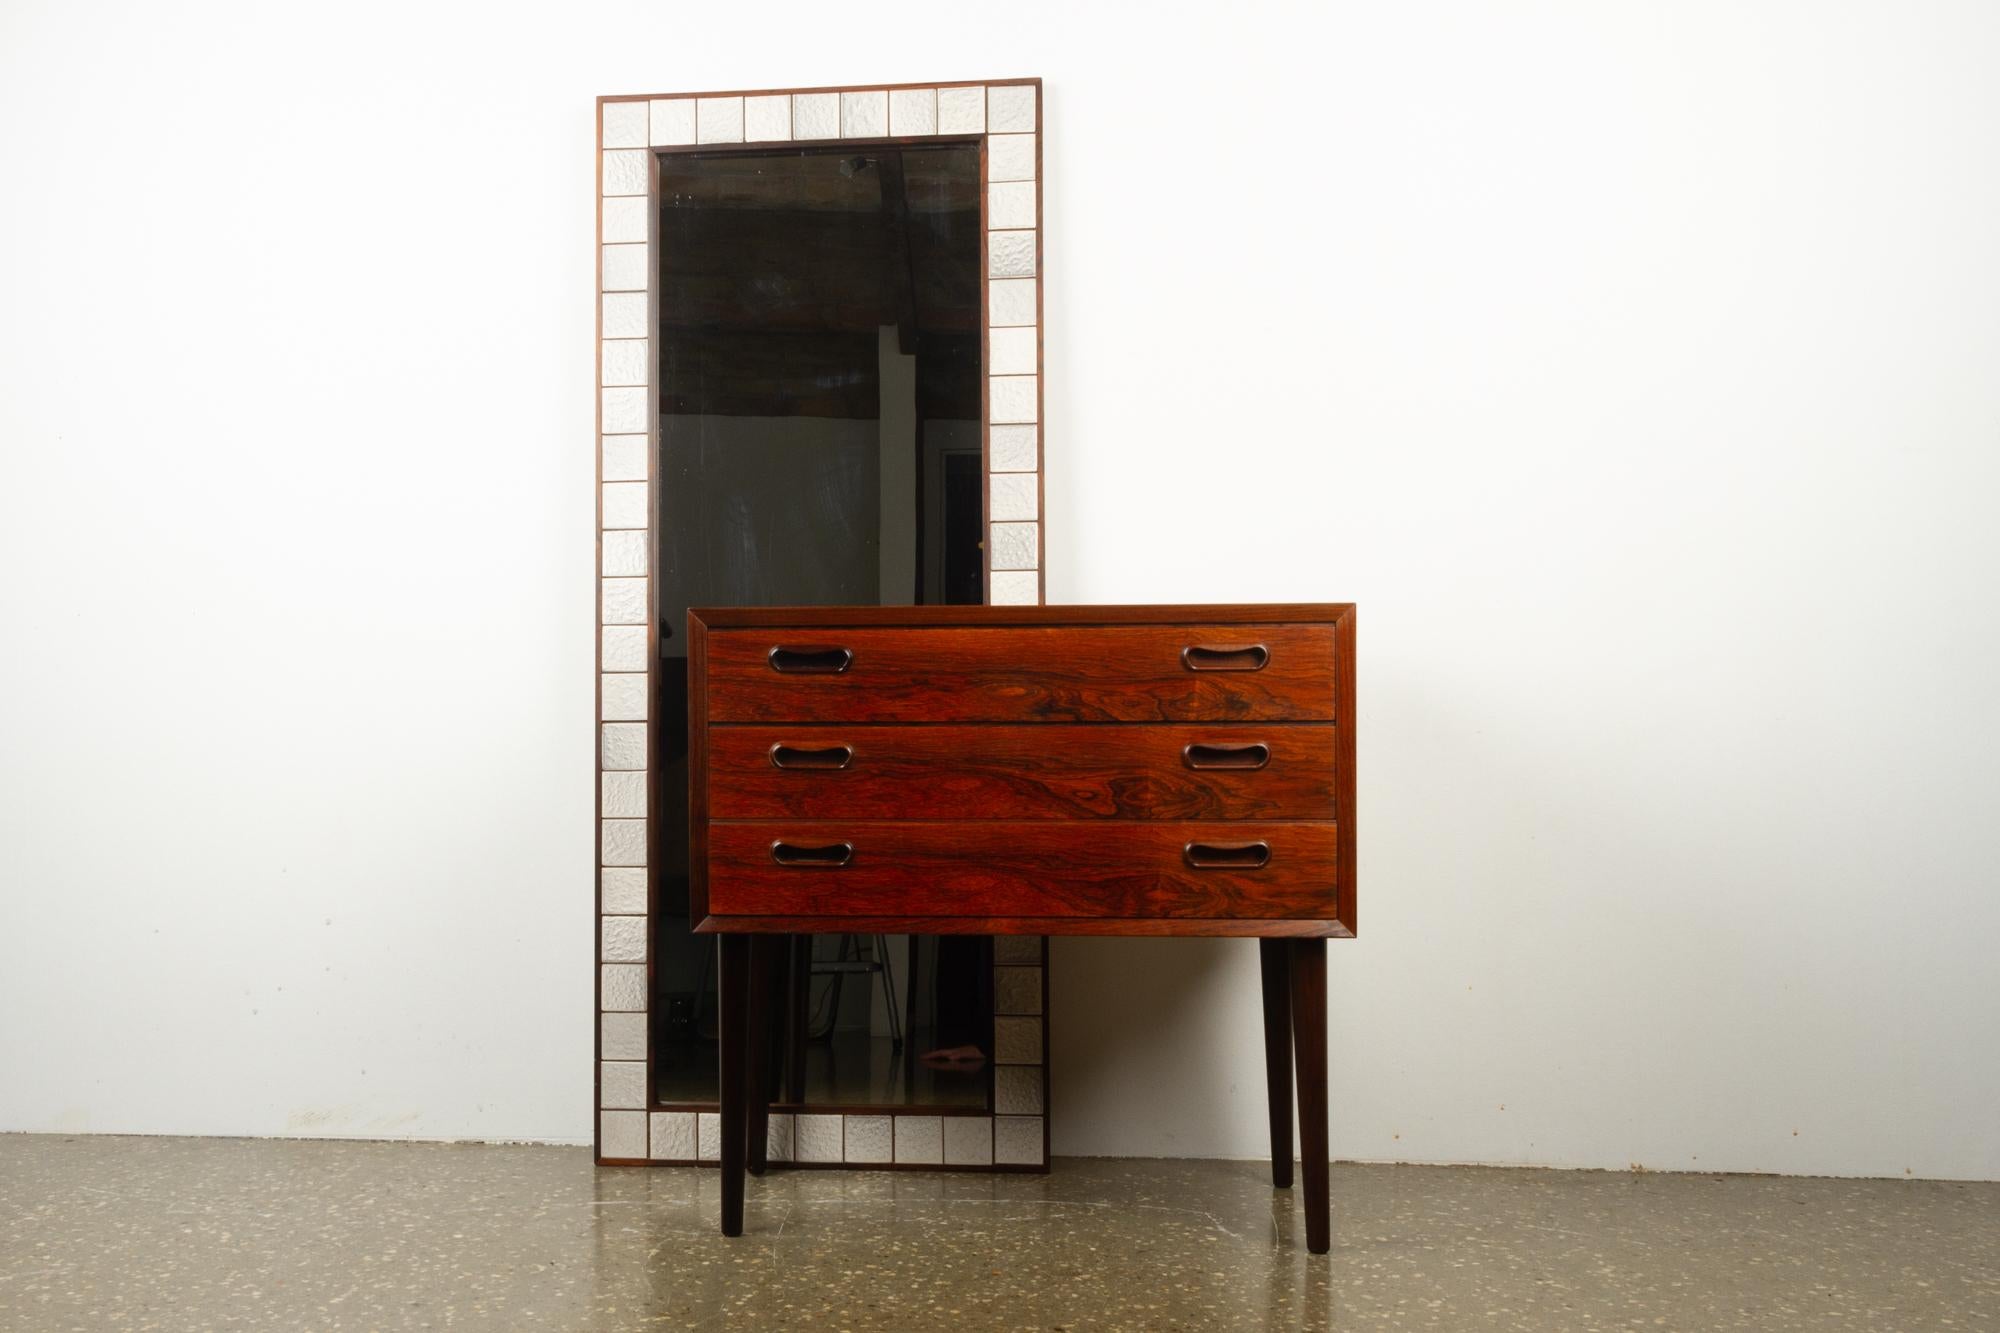 Vintage Danish hallway mirror and dresser set, 1960s
Dresser and matching mirror in Rosewood. Chest of drawers with three wide drawers with sculpted grips in solid Rosewood and tapered edges. Very beautiful and expressive grain in the Rosewood